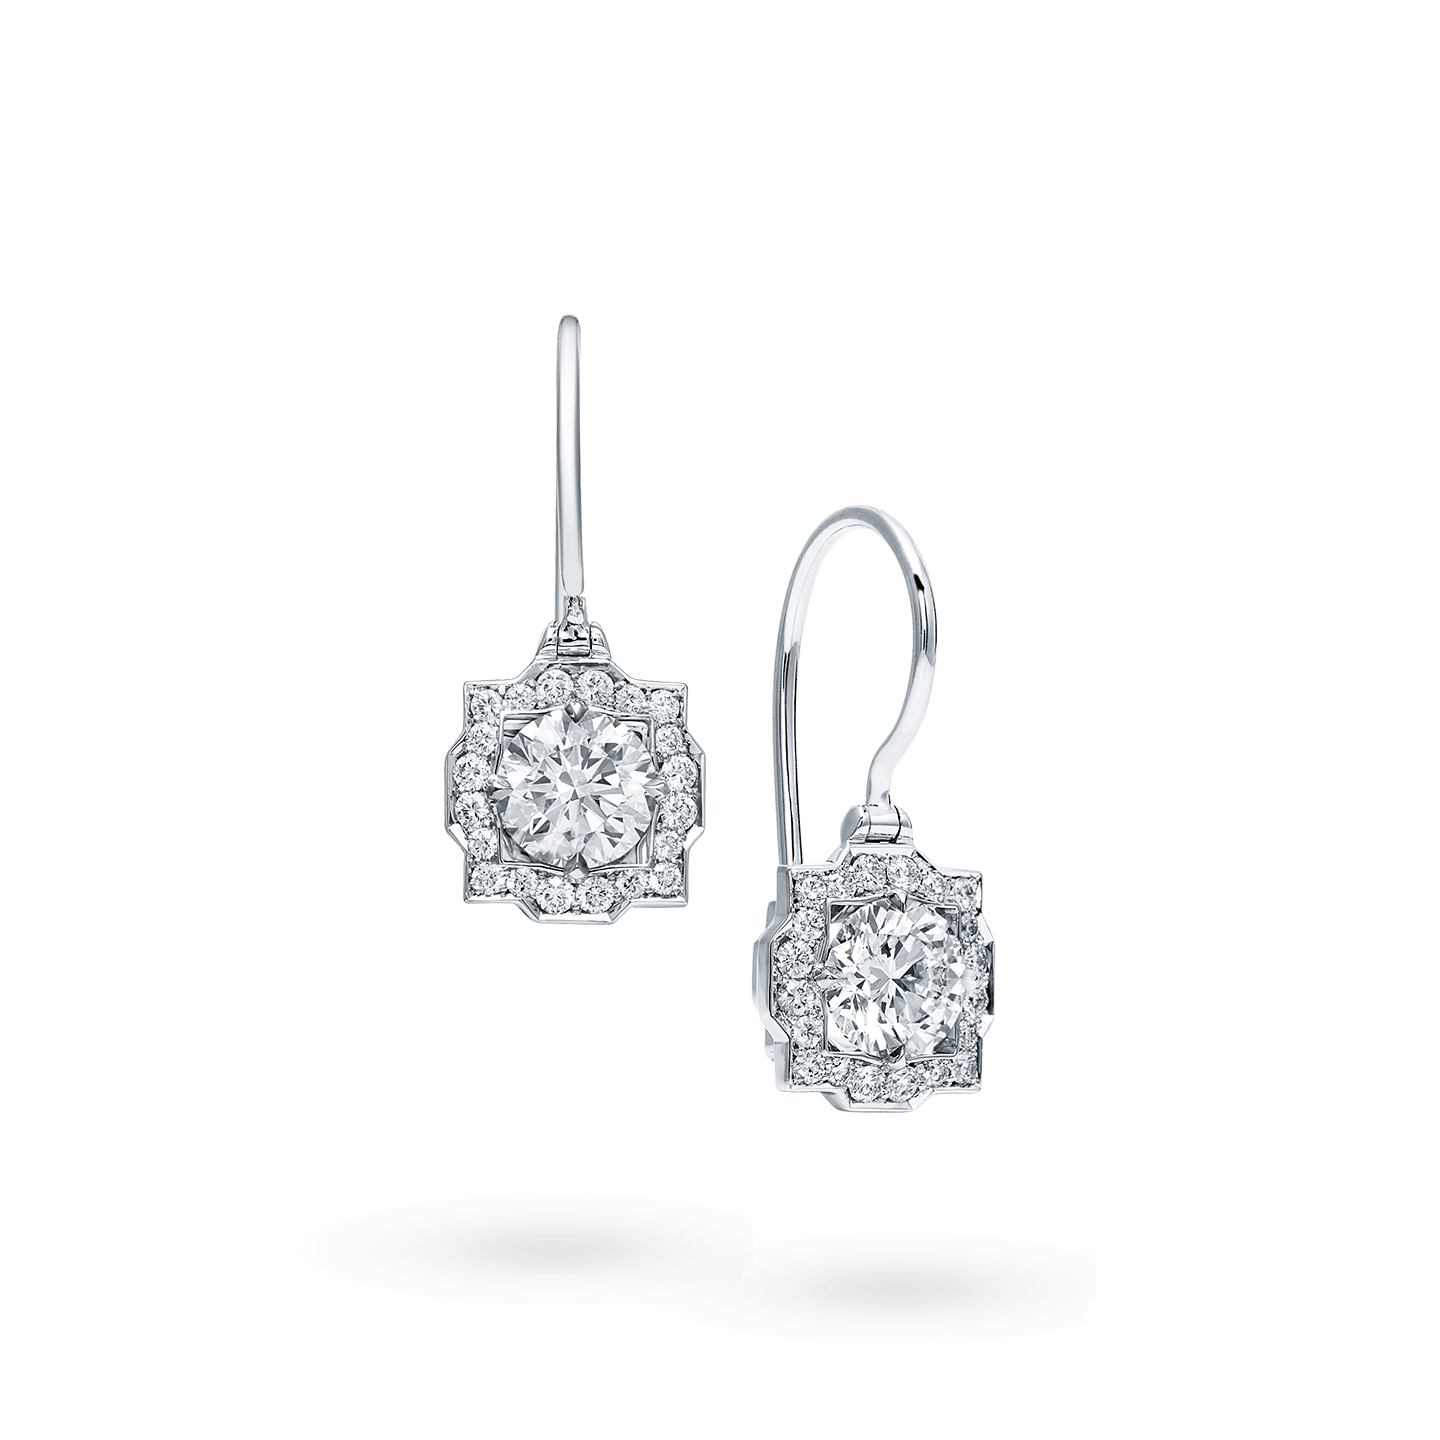 Belle Diamond Earstuds on Wires, Product Image 2